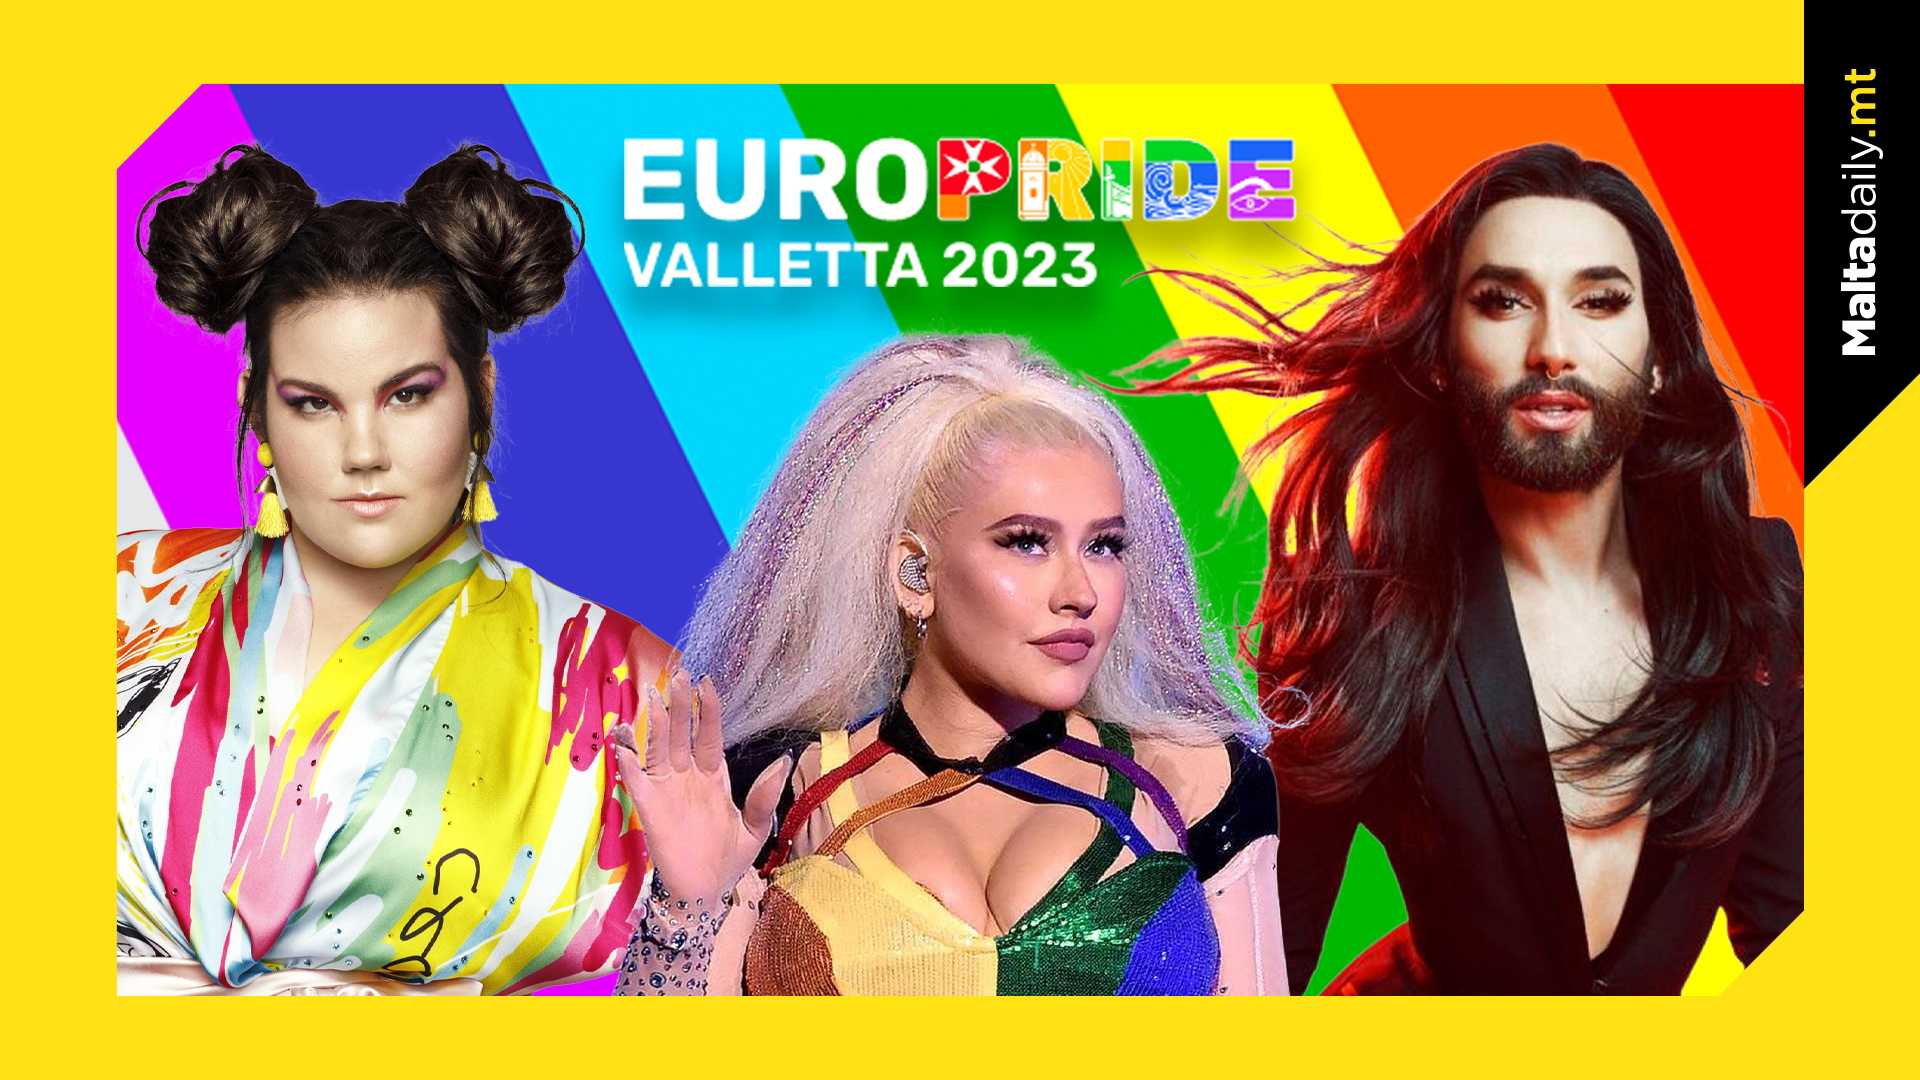 Christina Aguilera, Netta, and Conchita are all part of the star-studded lineup for Euro Pride